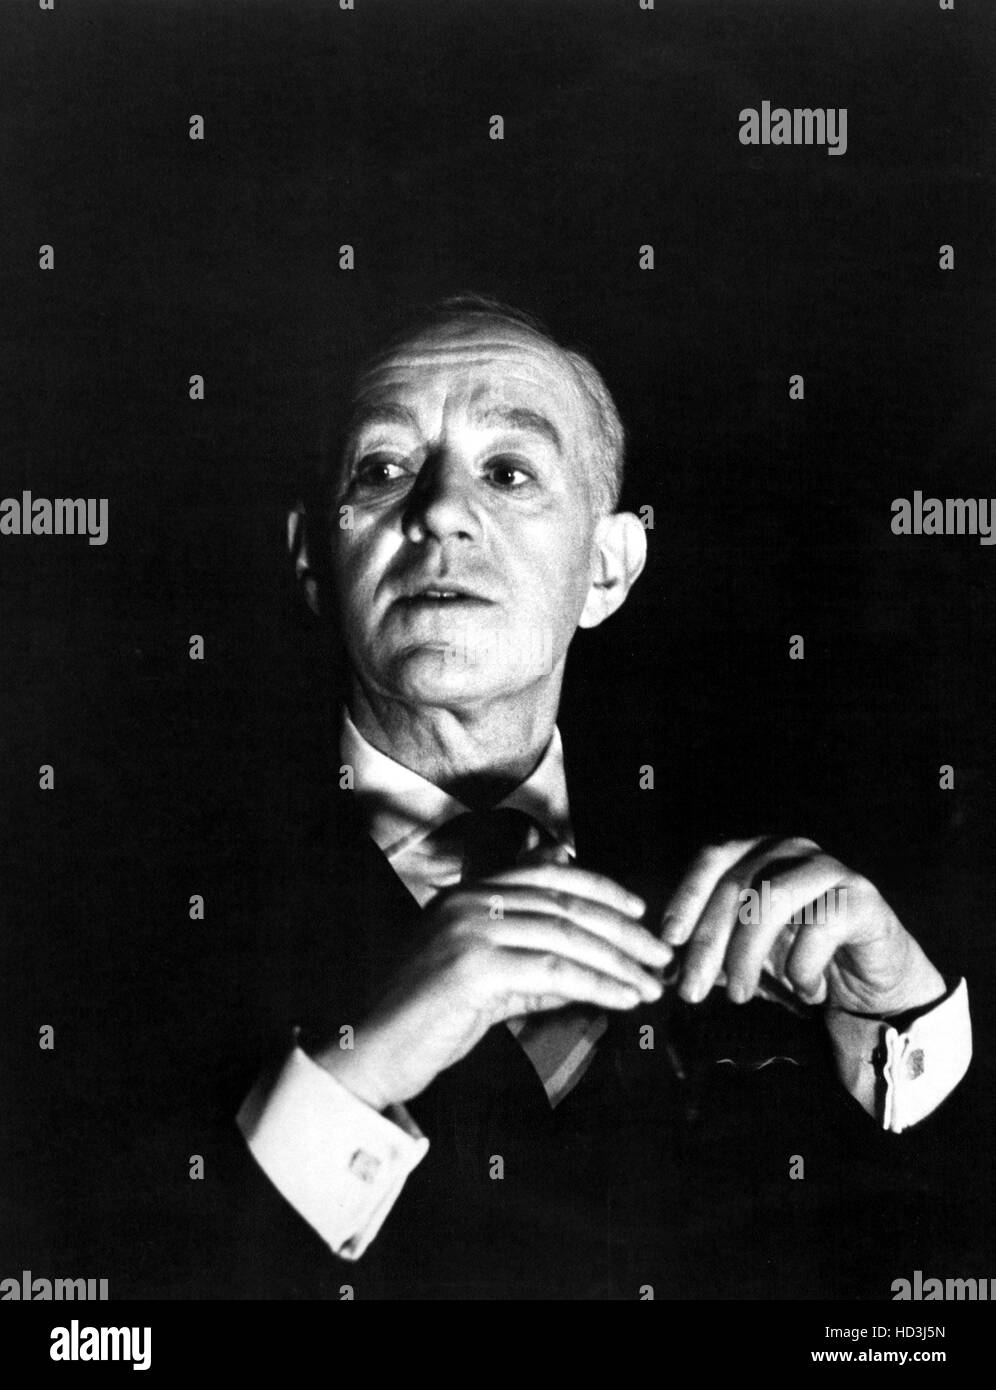 THE ACTOR, Alec Guinness, 1968 Stock Photo - Alamy